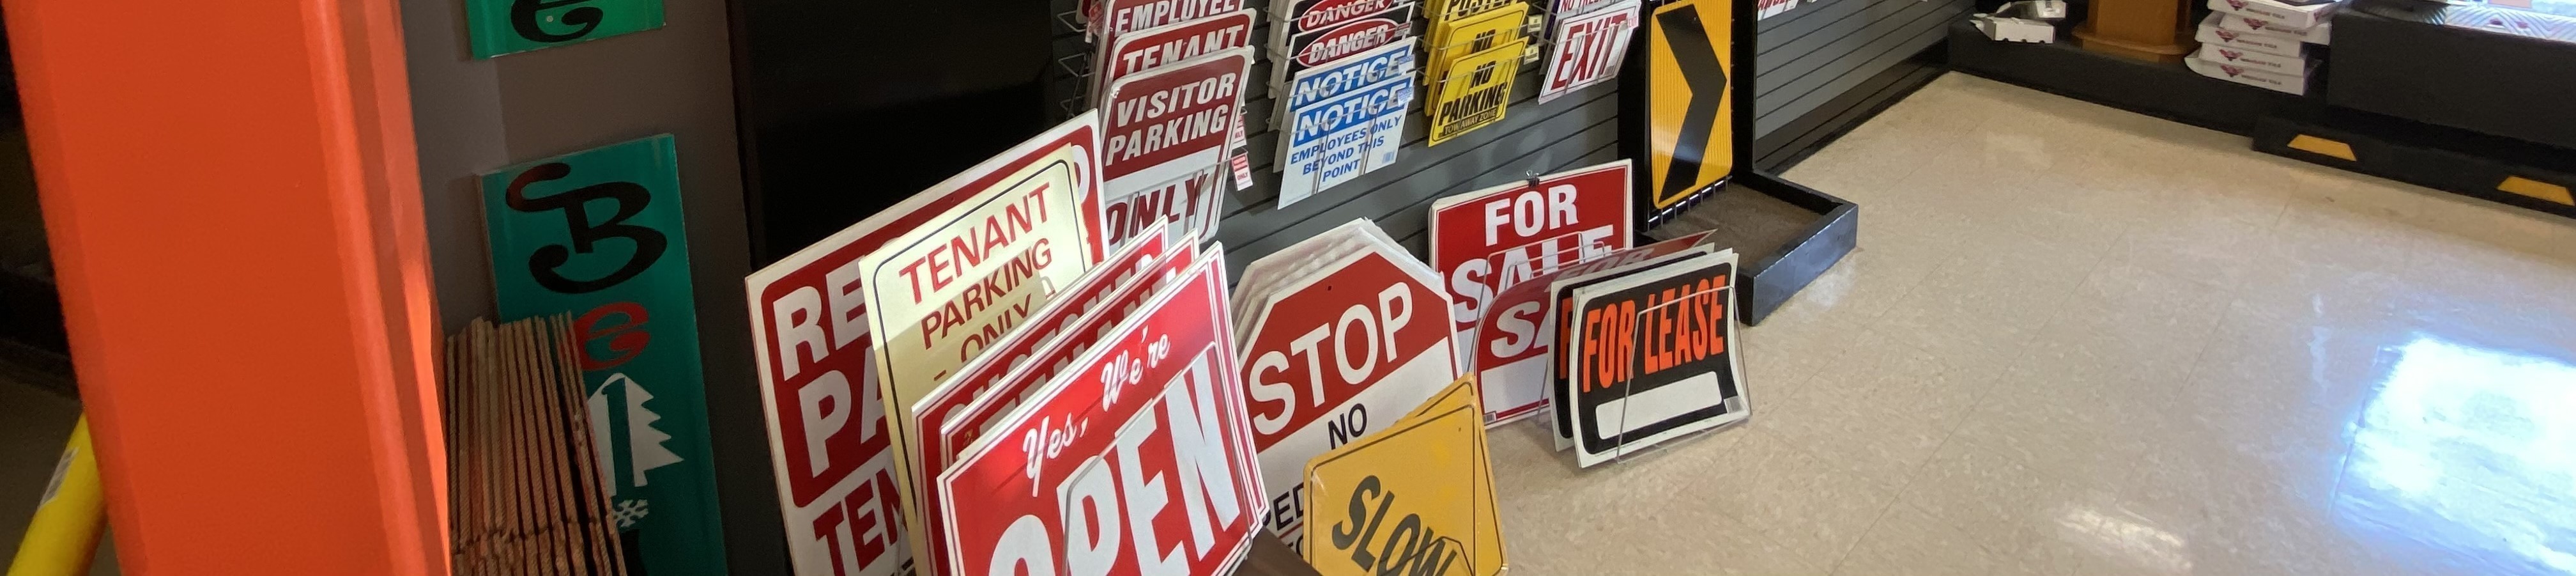 Various building signs organized by type inside the groundUP stores